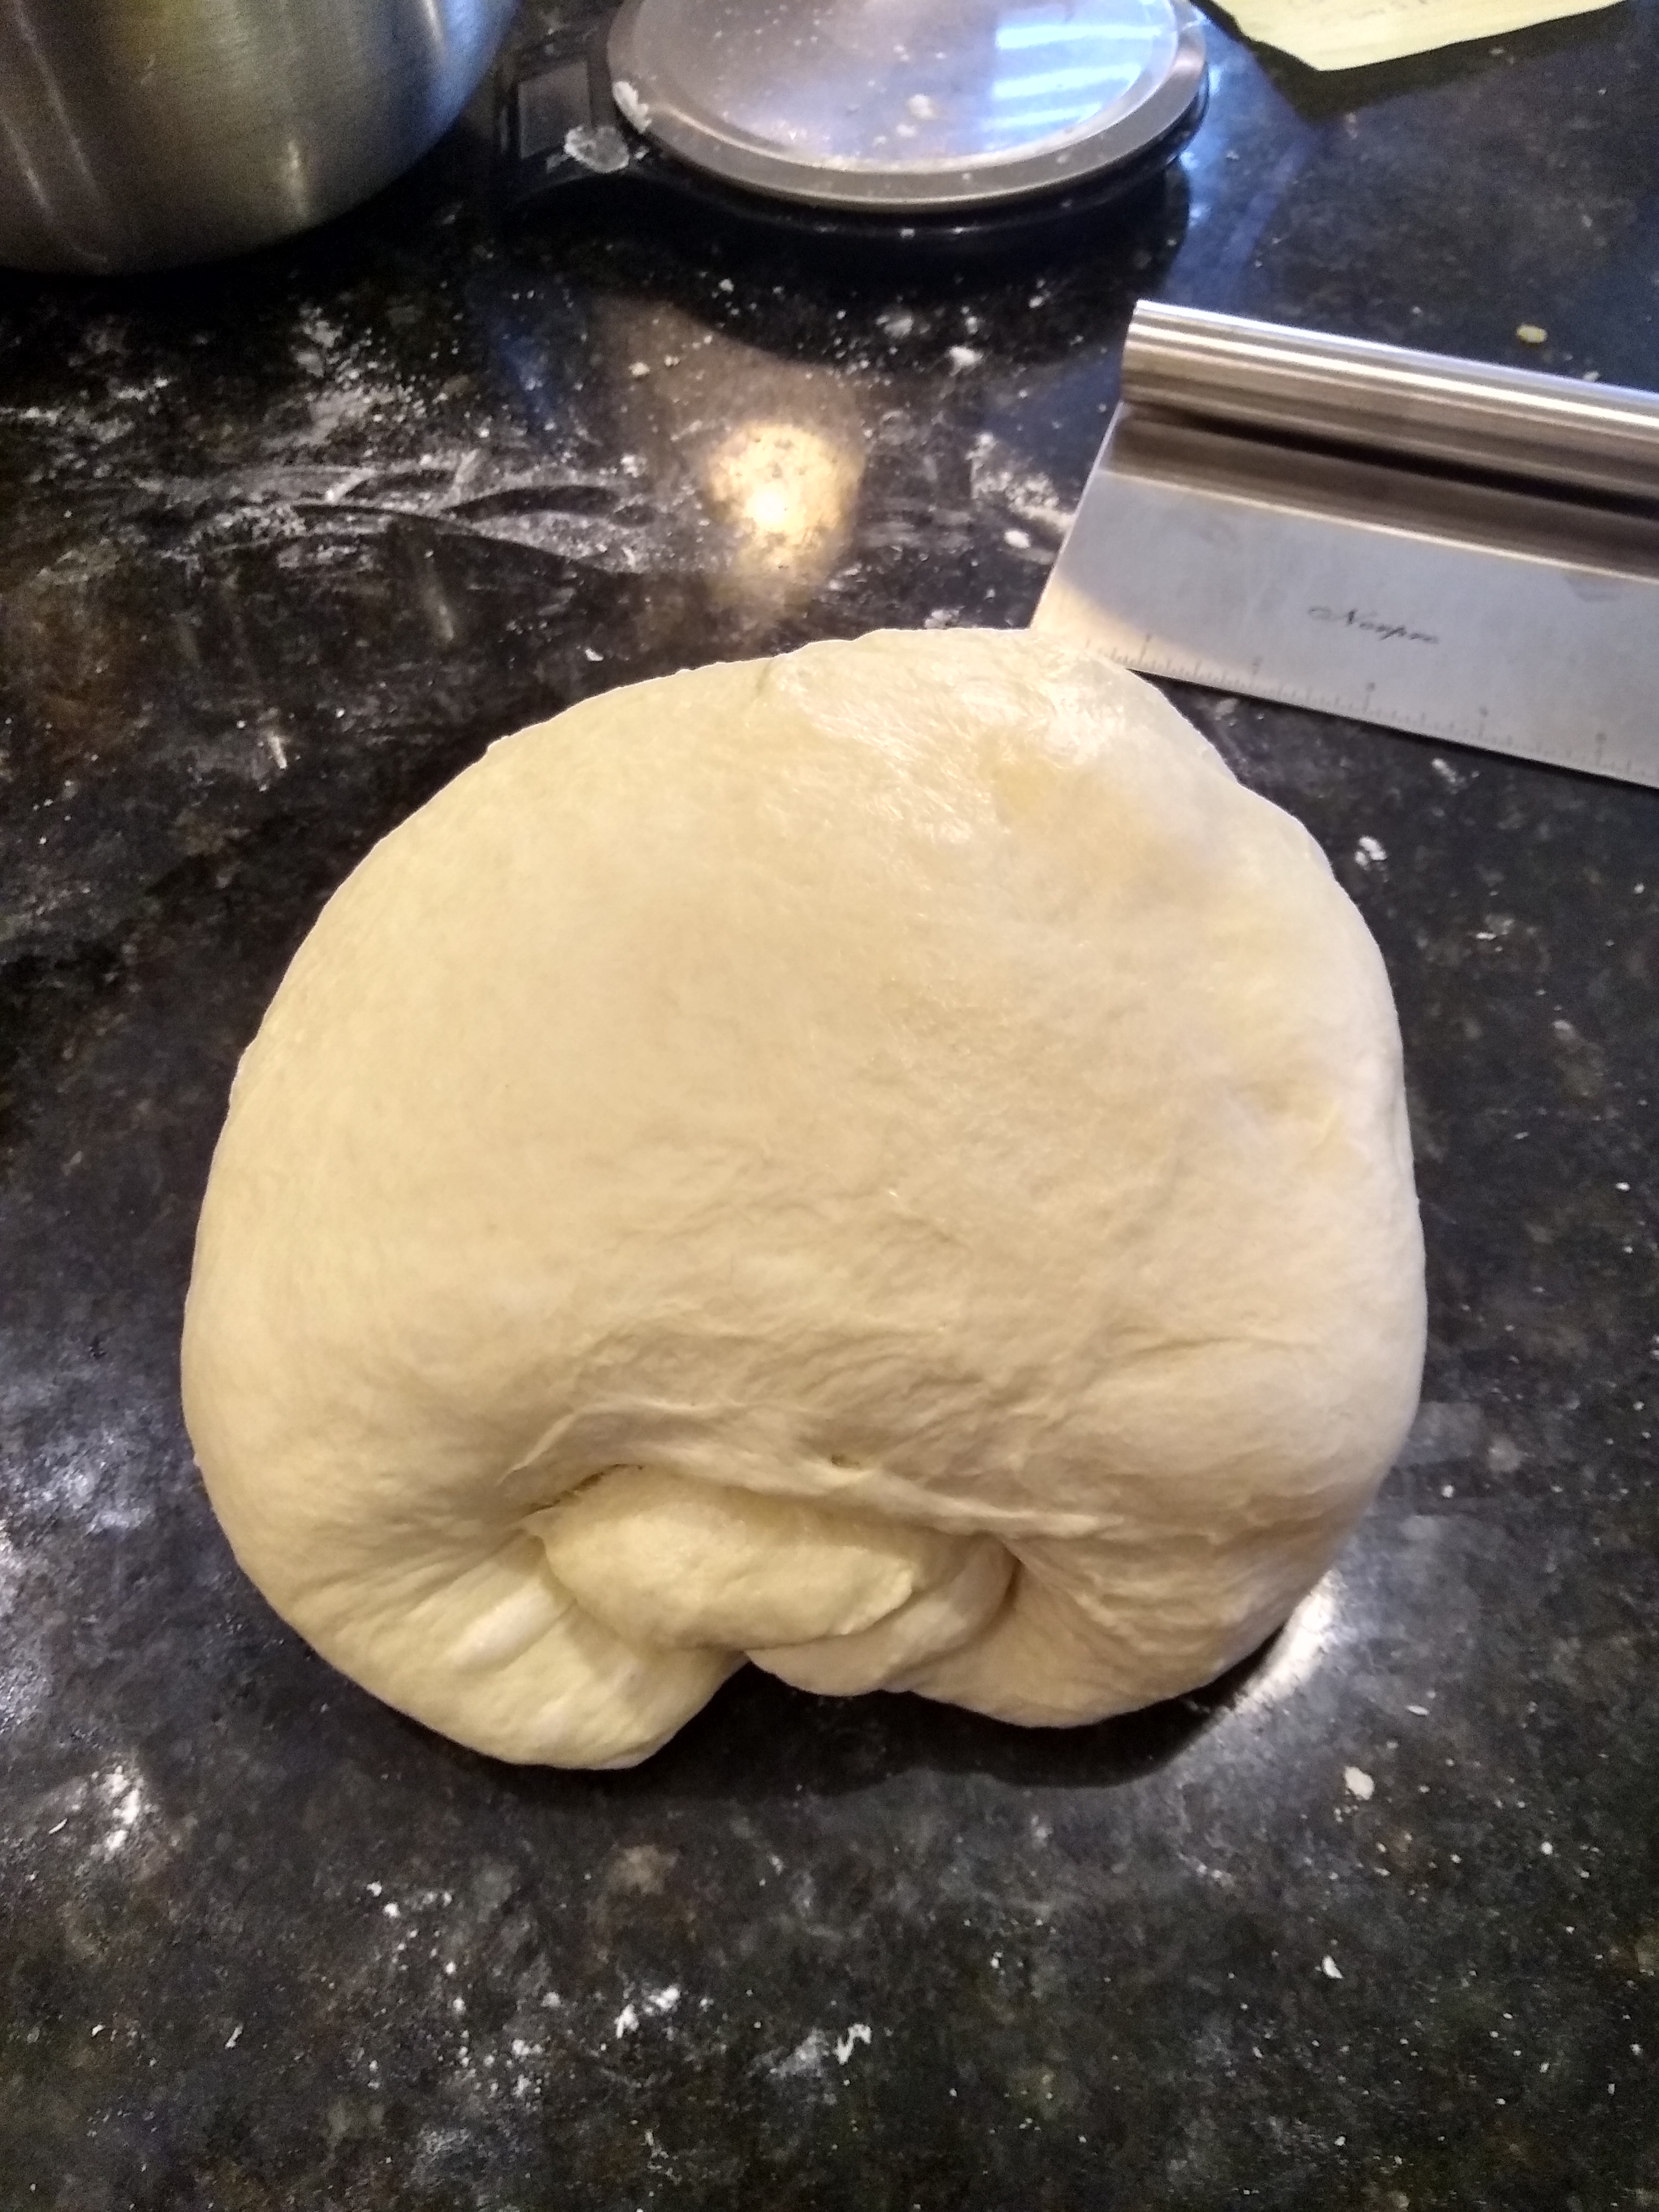 Big pile of dough, post proofing